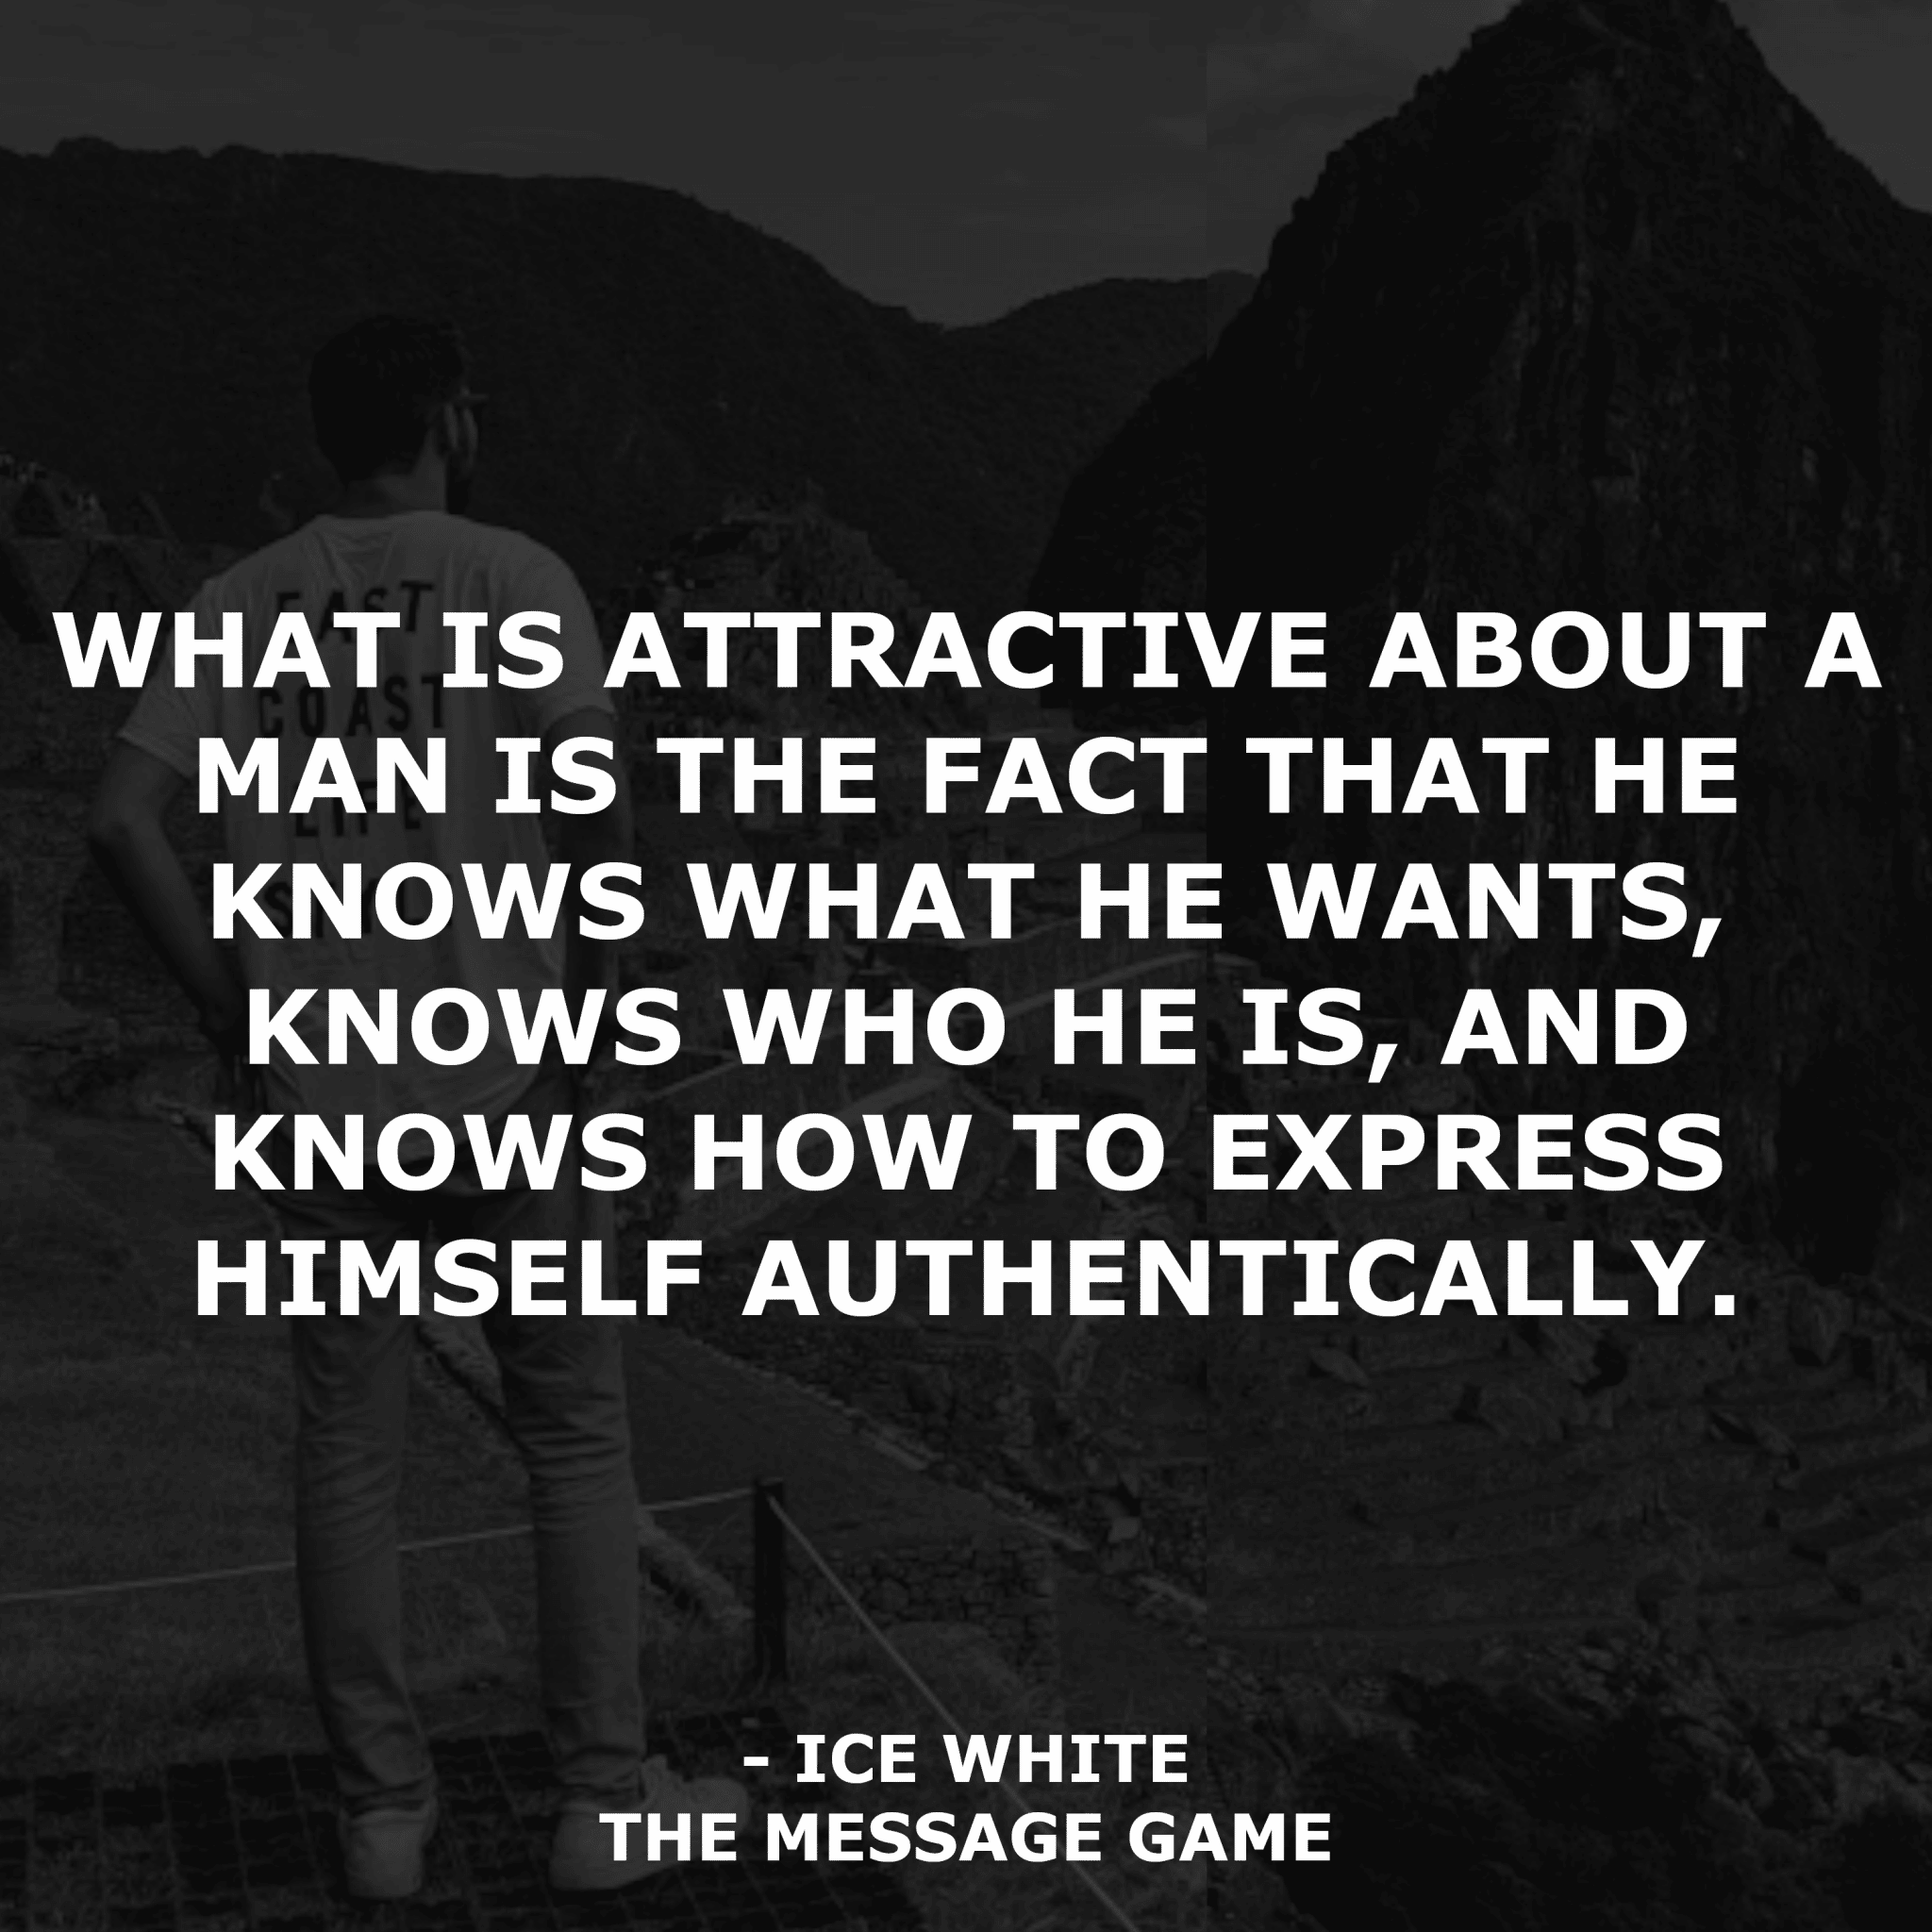 Book Quotes What is attractive about a man is the fact that he knows what he wants, knows who he is, and knows how to express himself authentically Ice White Message Game